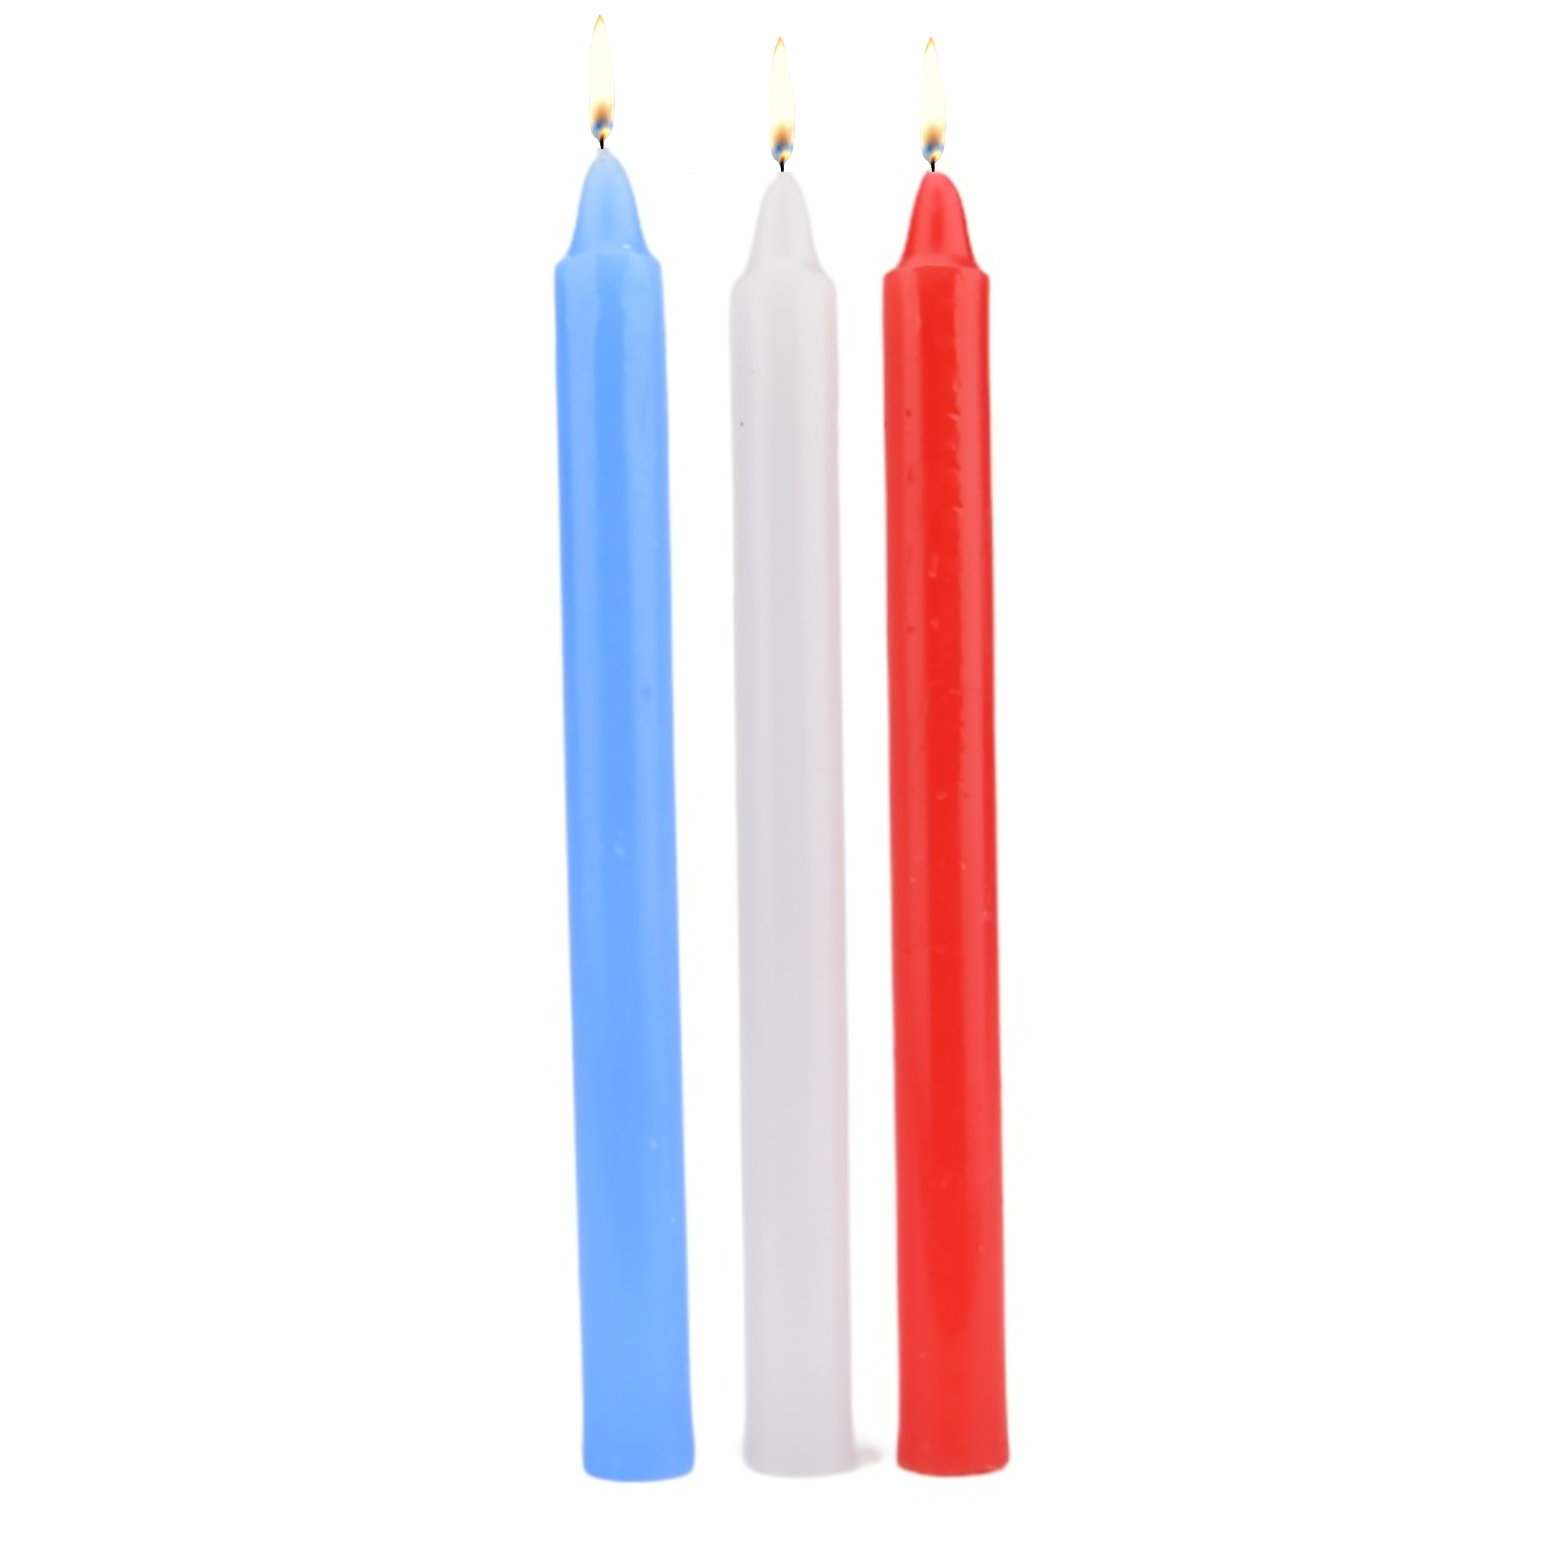 n12142 bound to play hot wax candles 3 pack